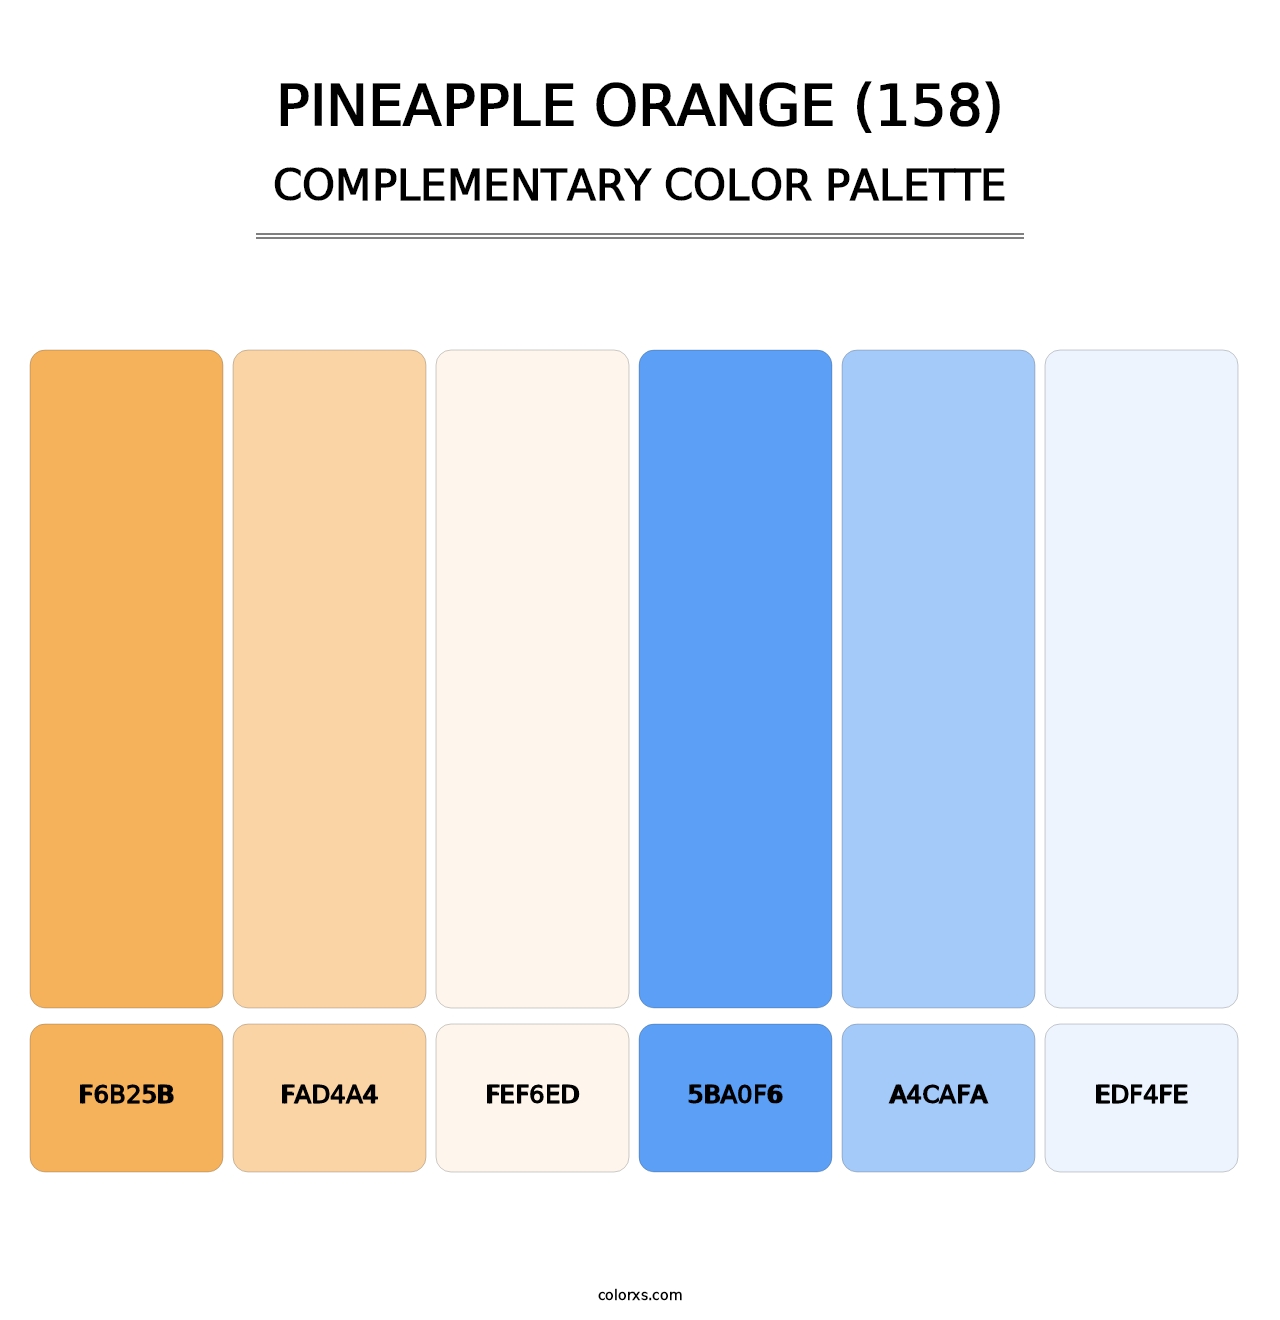 Pineapple Orange (158) - Complementary Color Palette